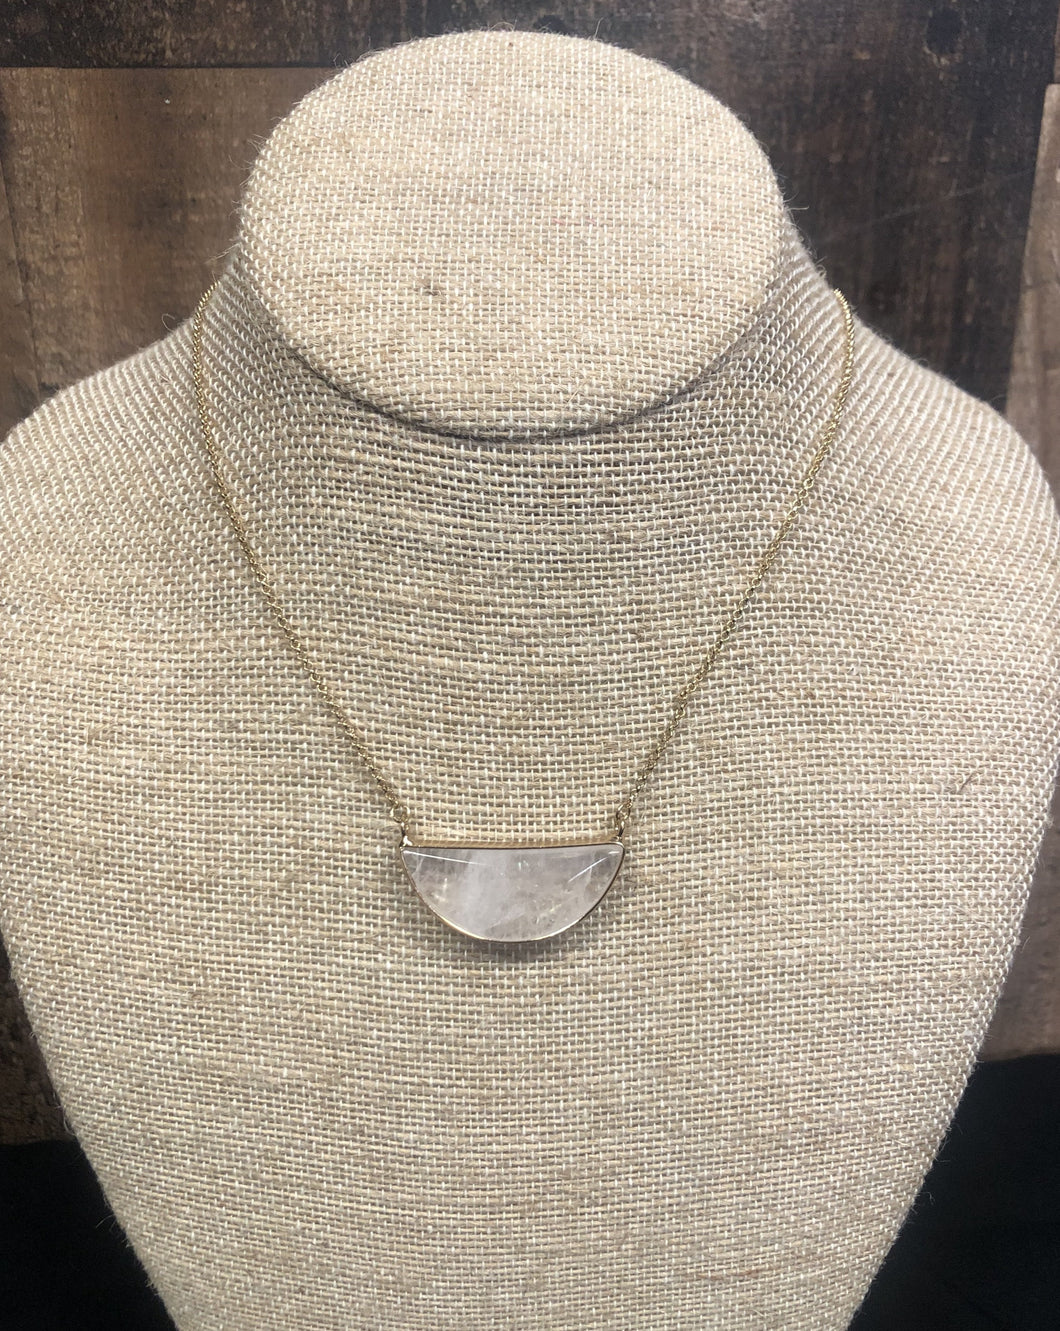 Our Braelyn Stone Necklace is a semi precious stone pendant necklace! 